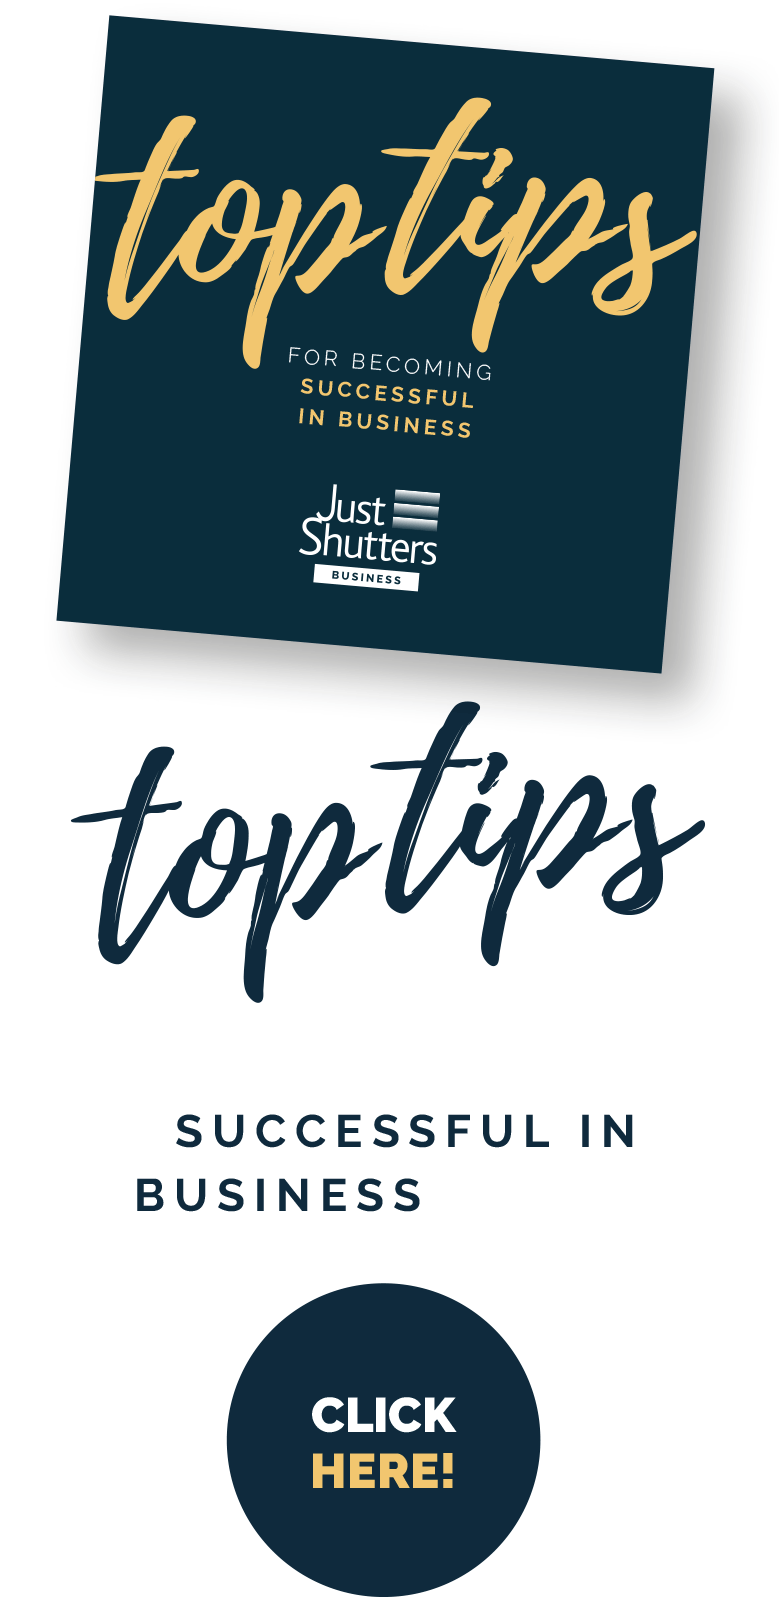 Top tips to becomign successful in business